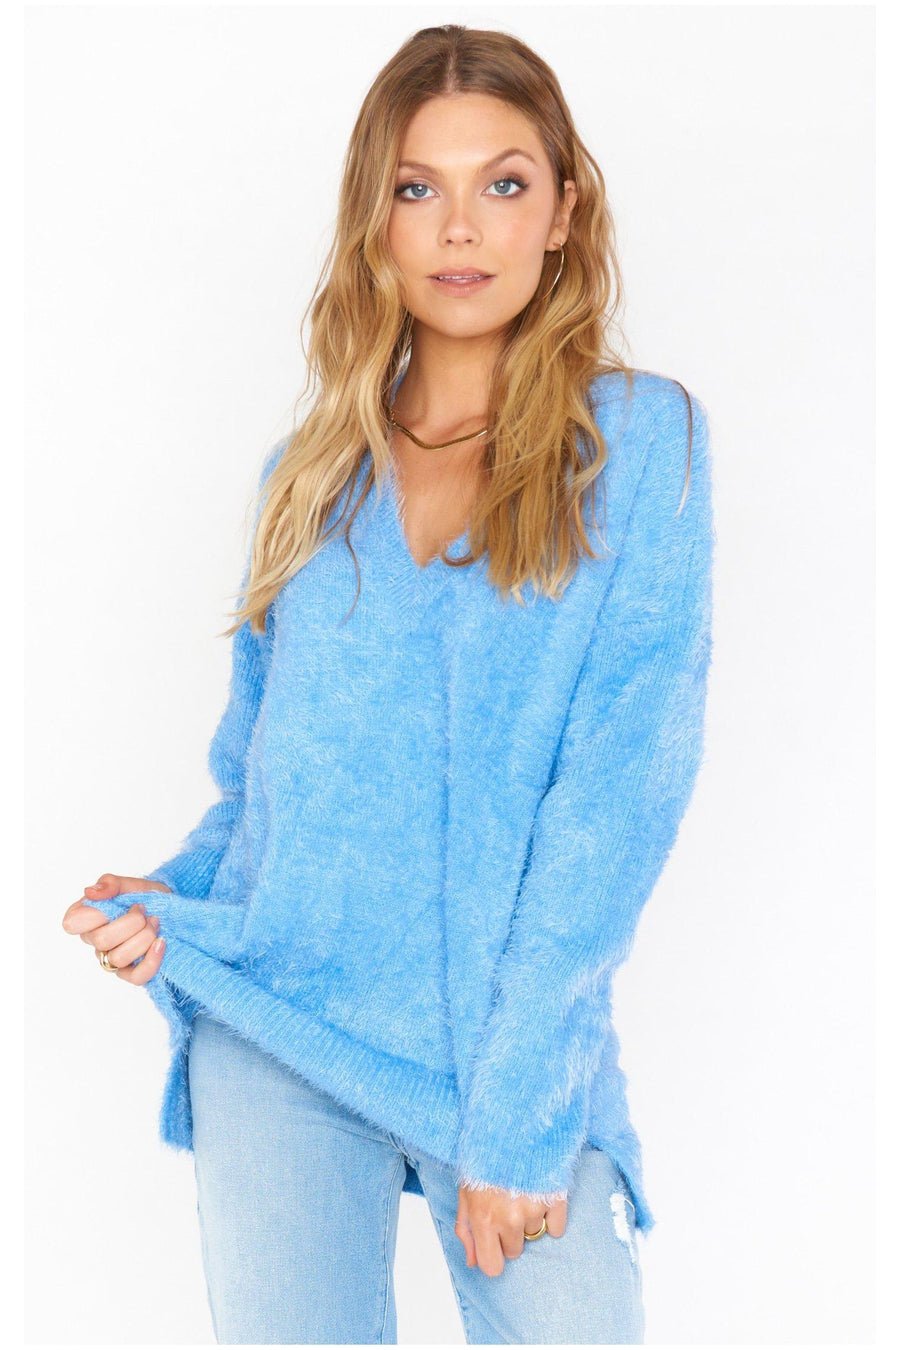 Shop Show Me Your Mumu Cozy Fuzzy Forever Knit Jumper - Premium Jumper from Show Me Your Mumu Online now at Spoiled Brat 